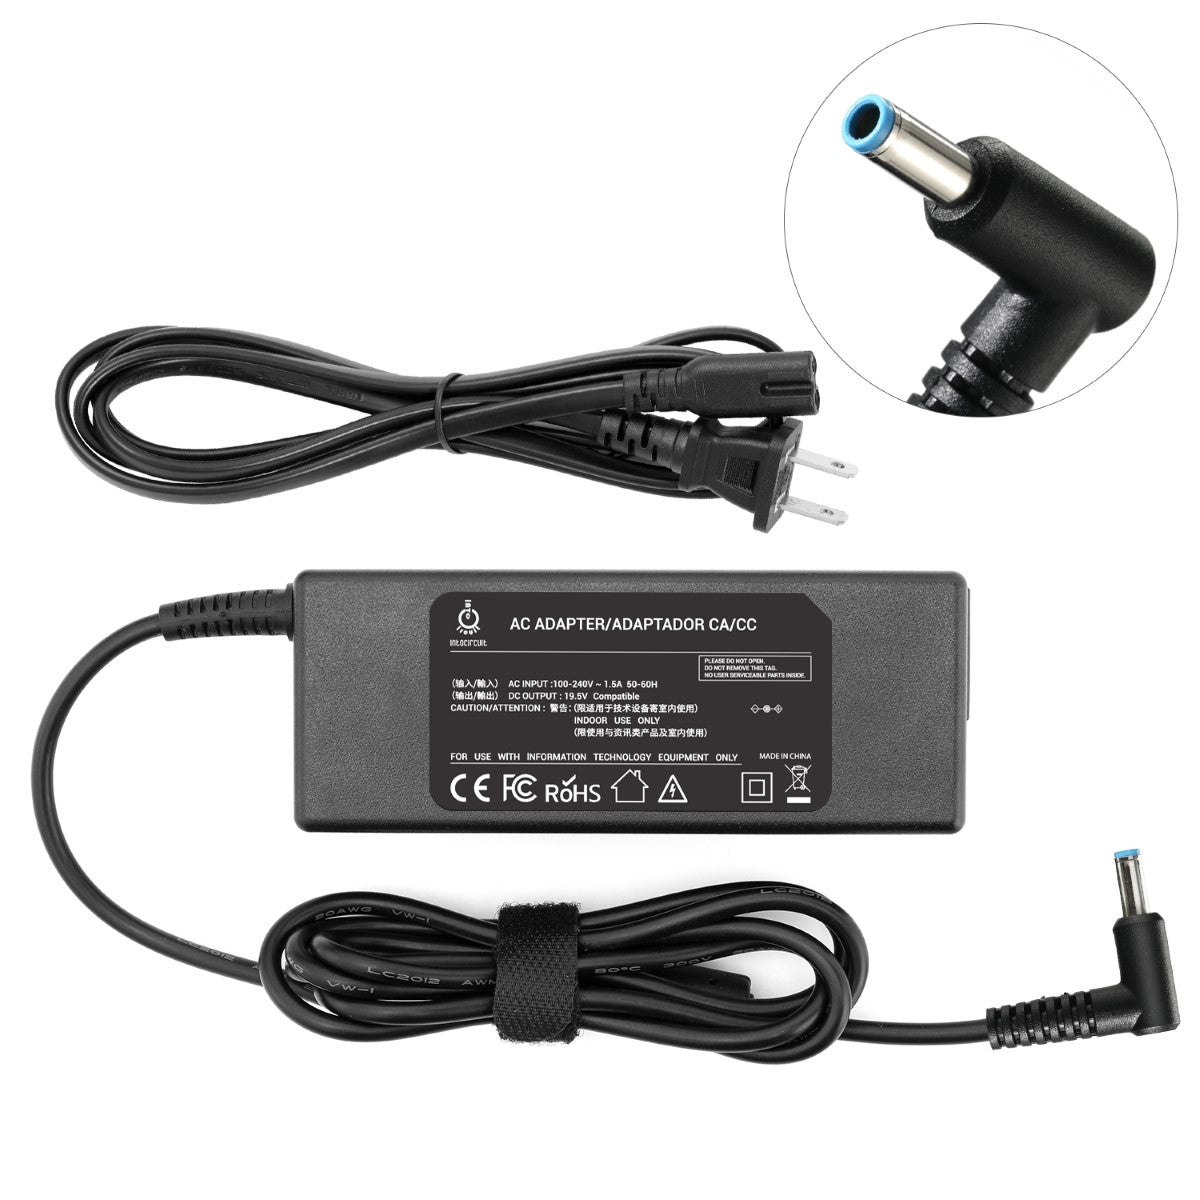 AC Adapter Charger for HP Stream 13-c002dx Notebook